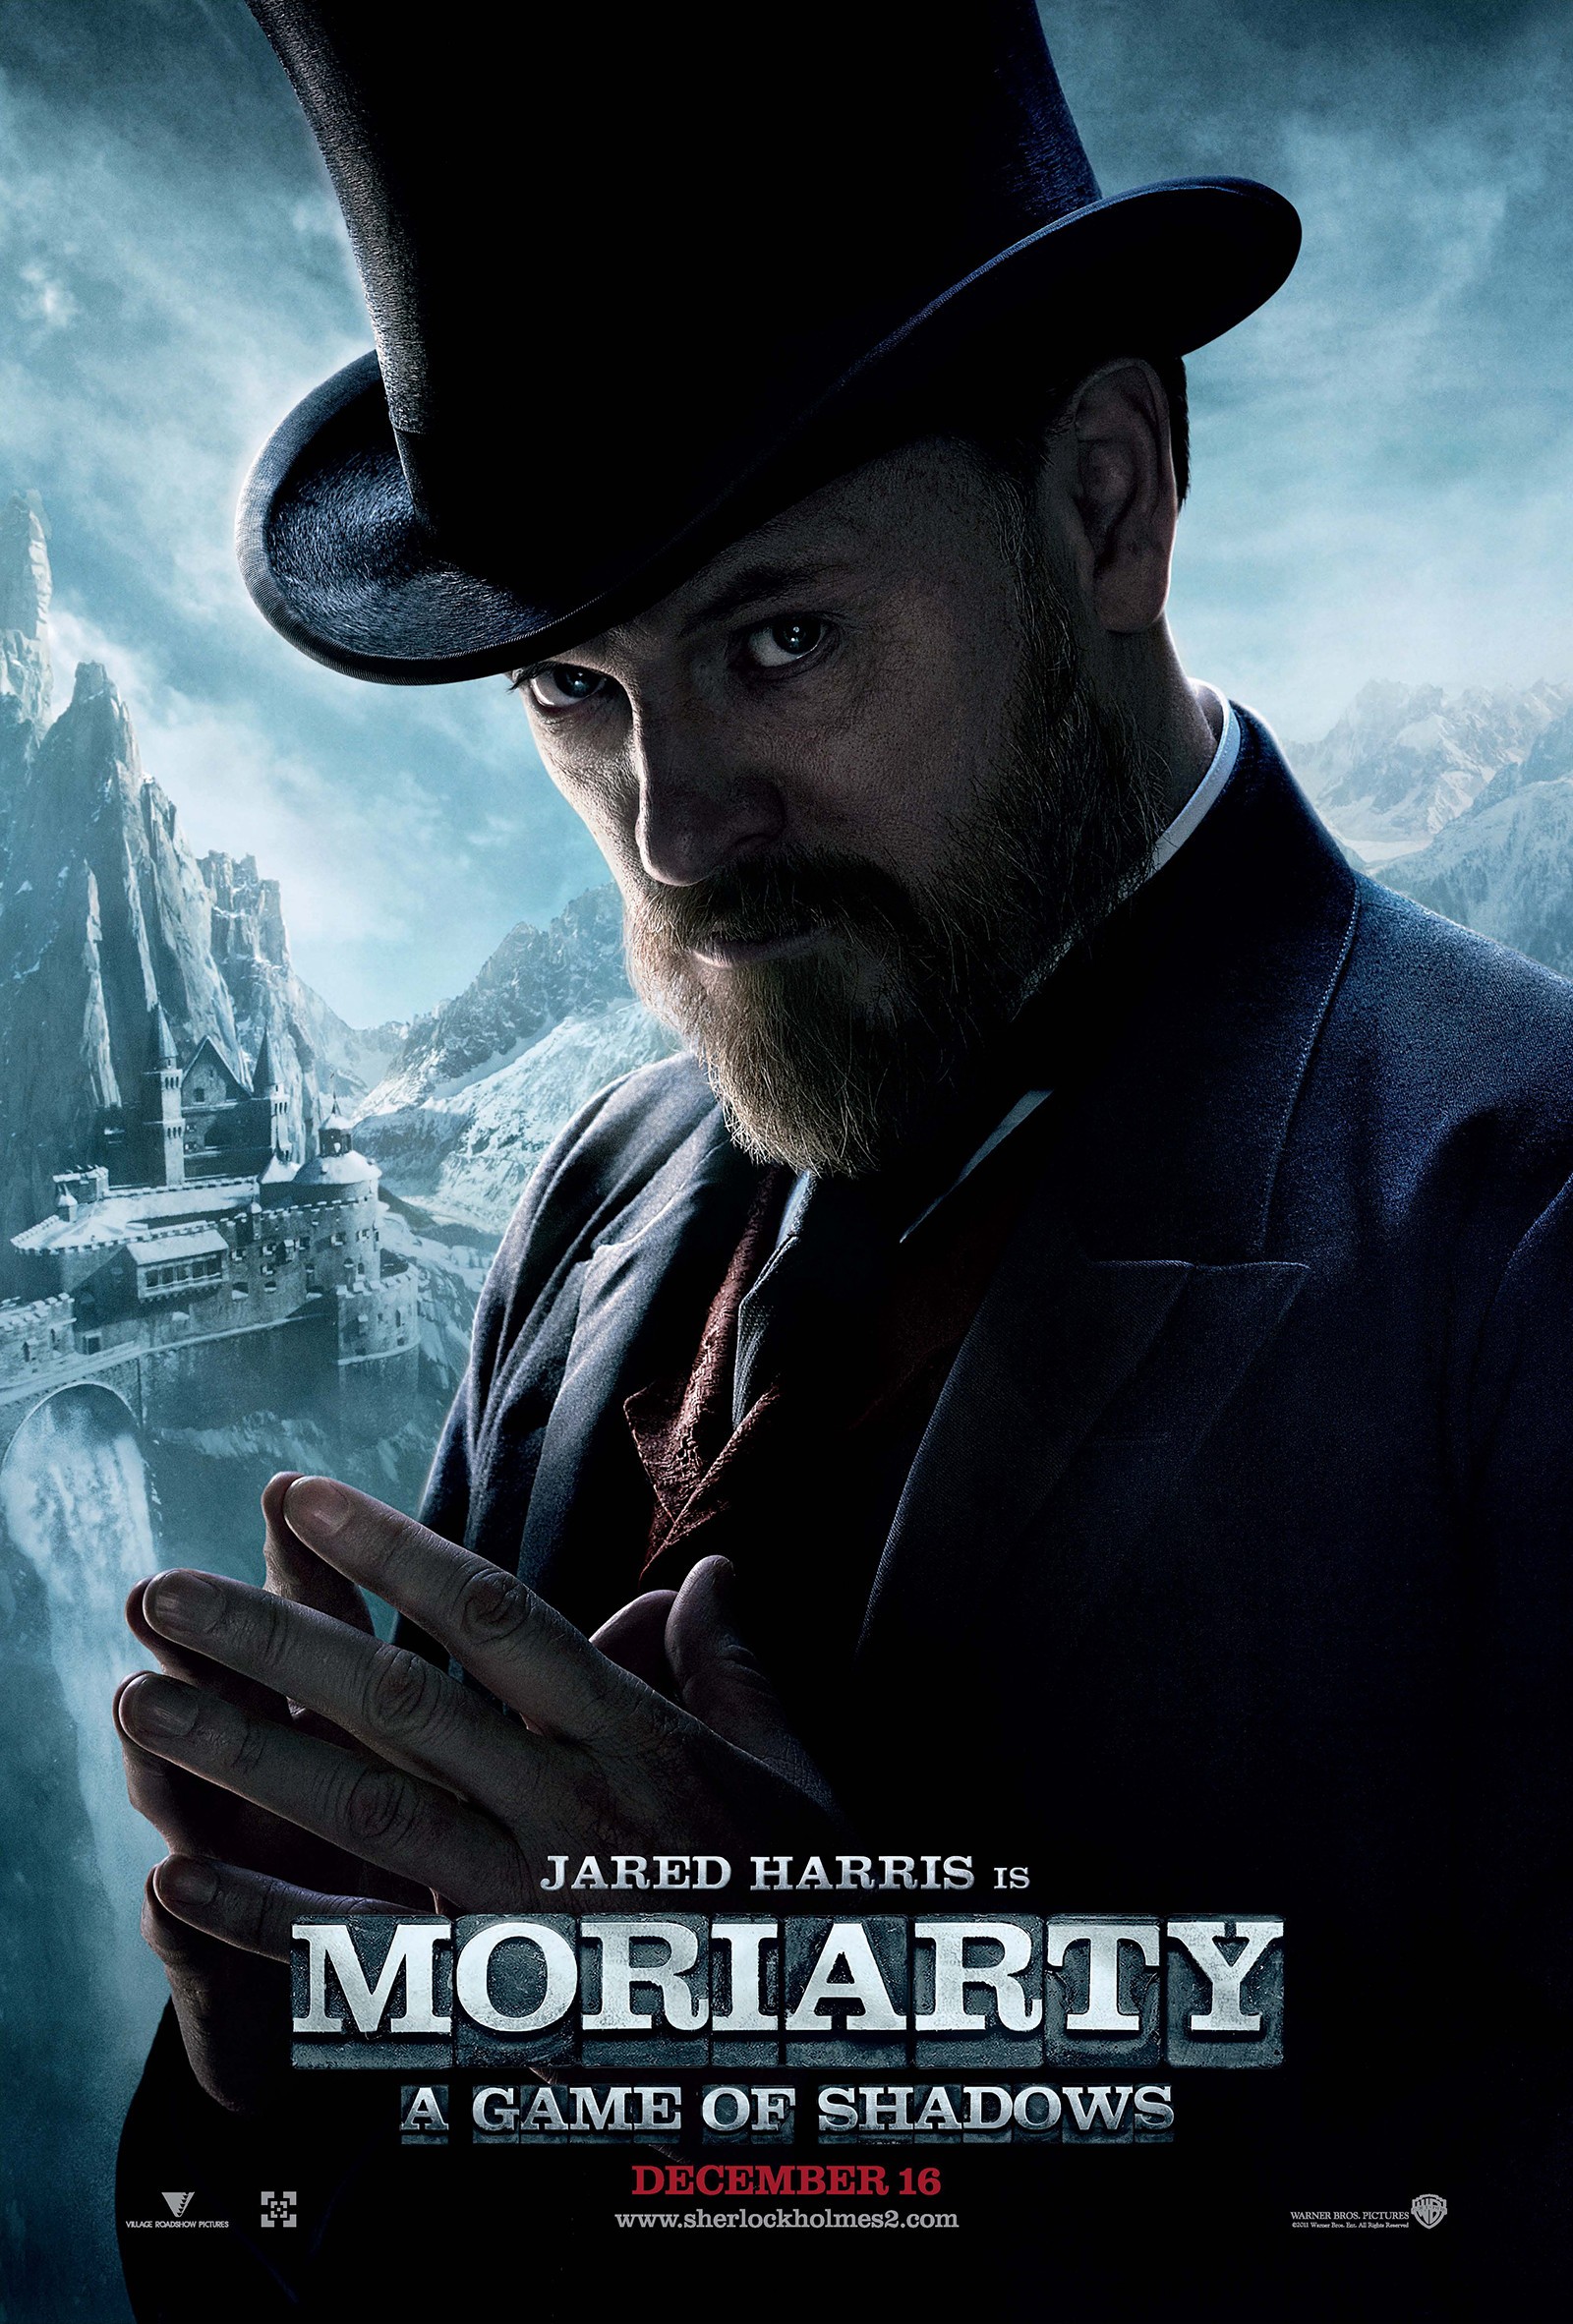 Sherlock Holmes: A Game of Shadows (#10 of 18): Mega Sized Movie Poster ...